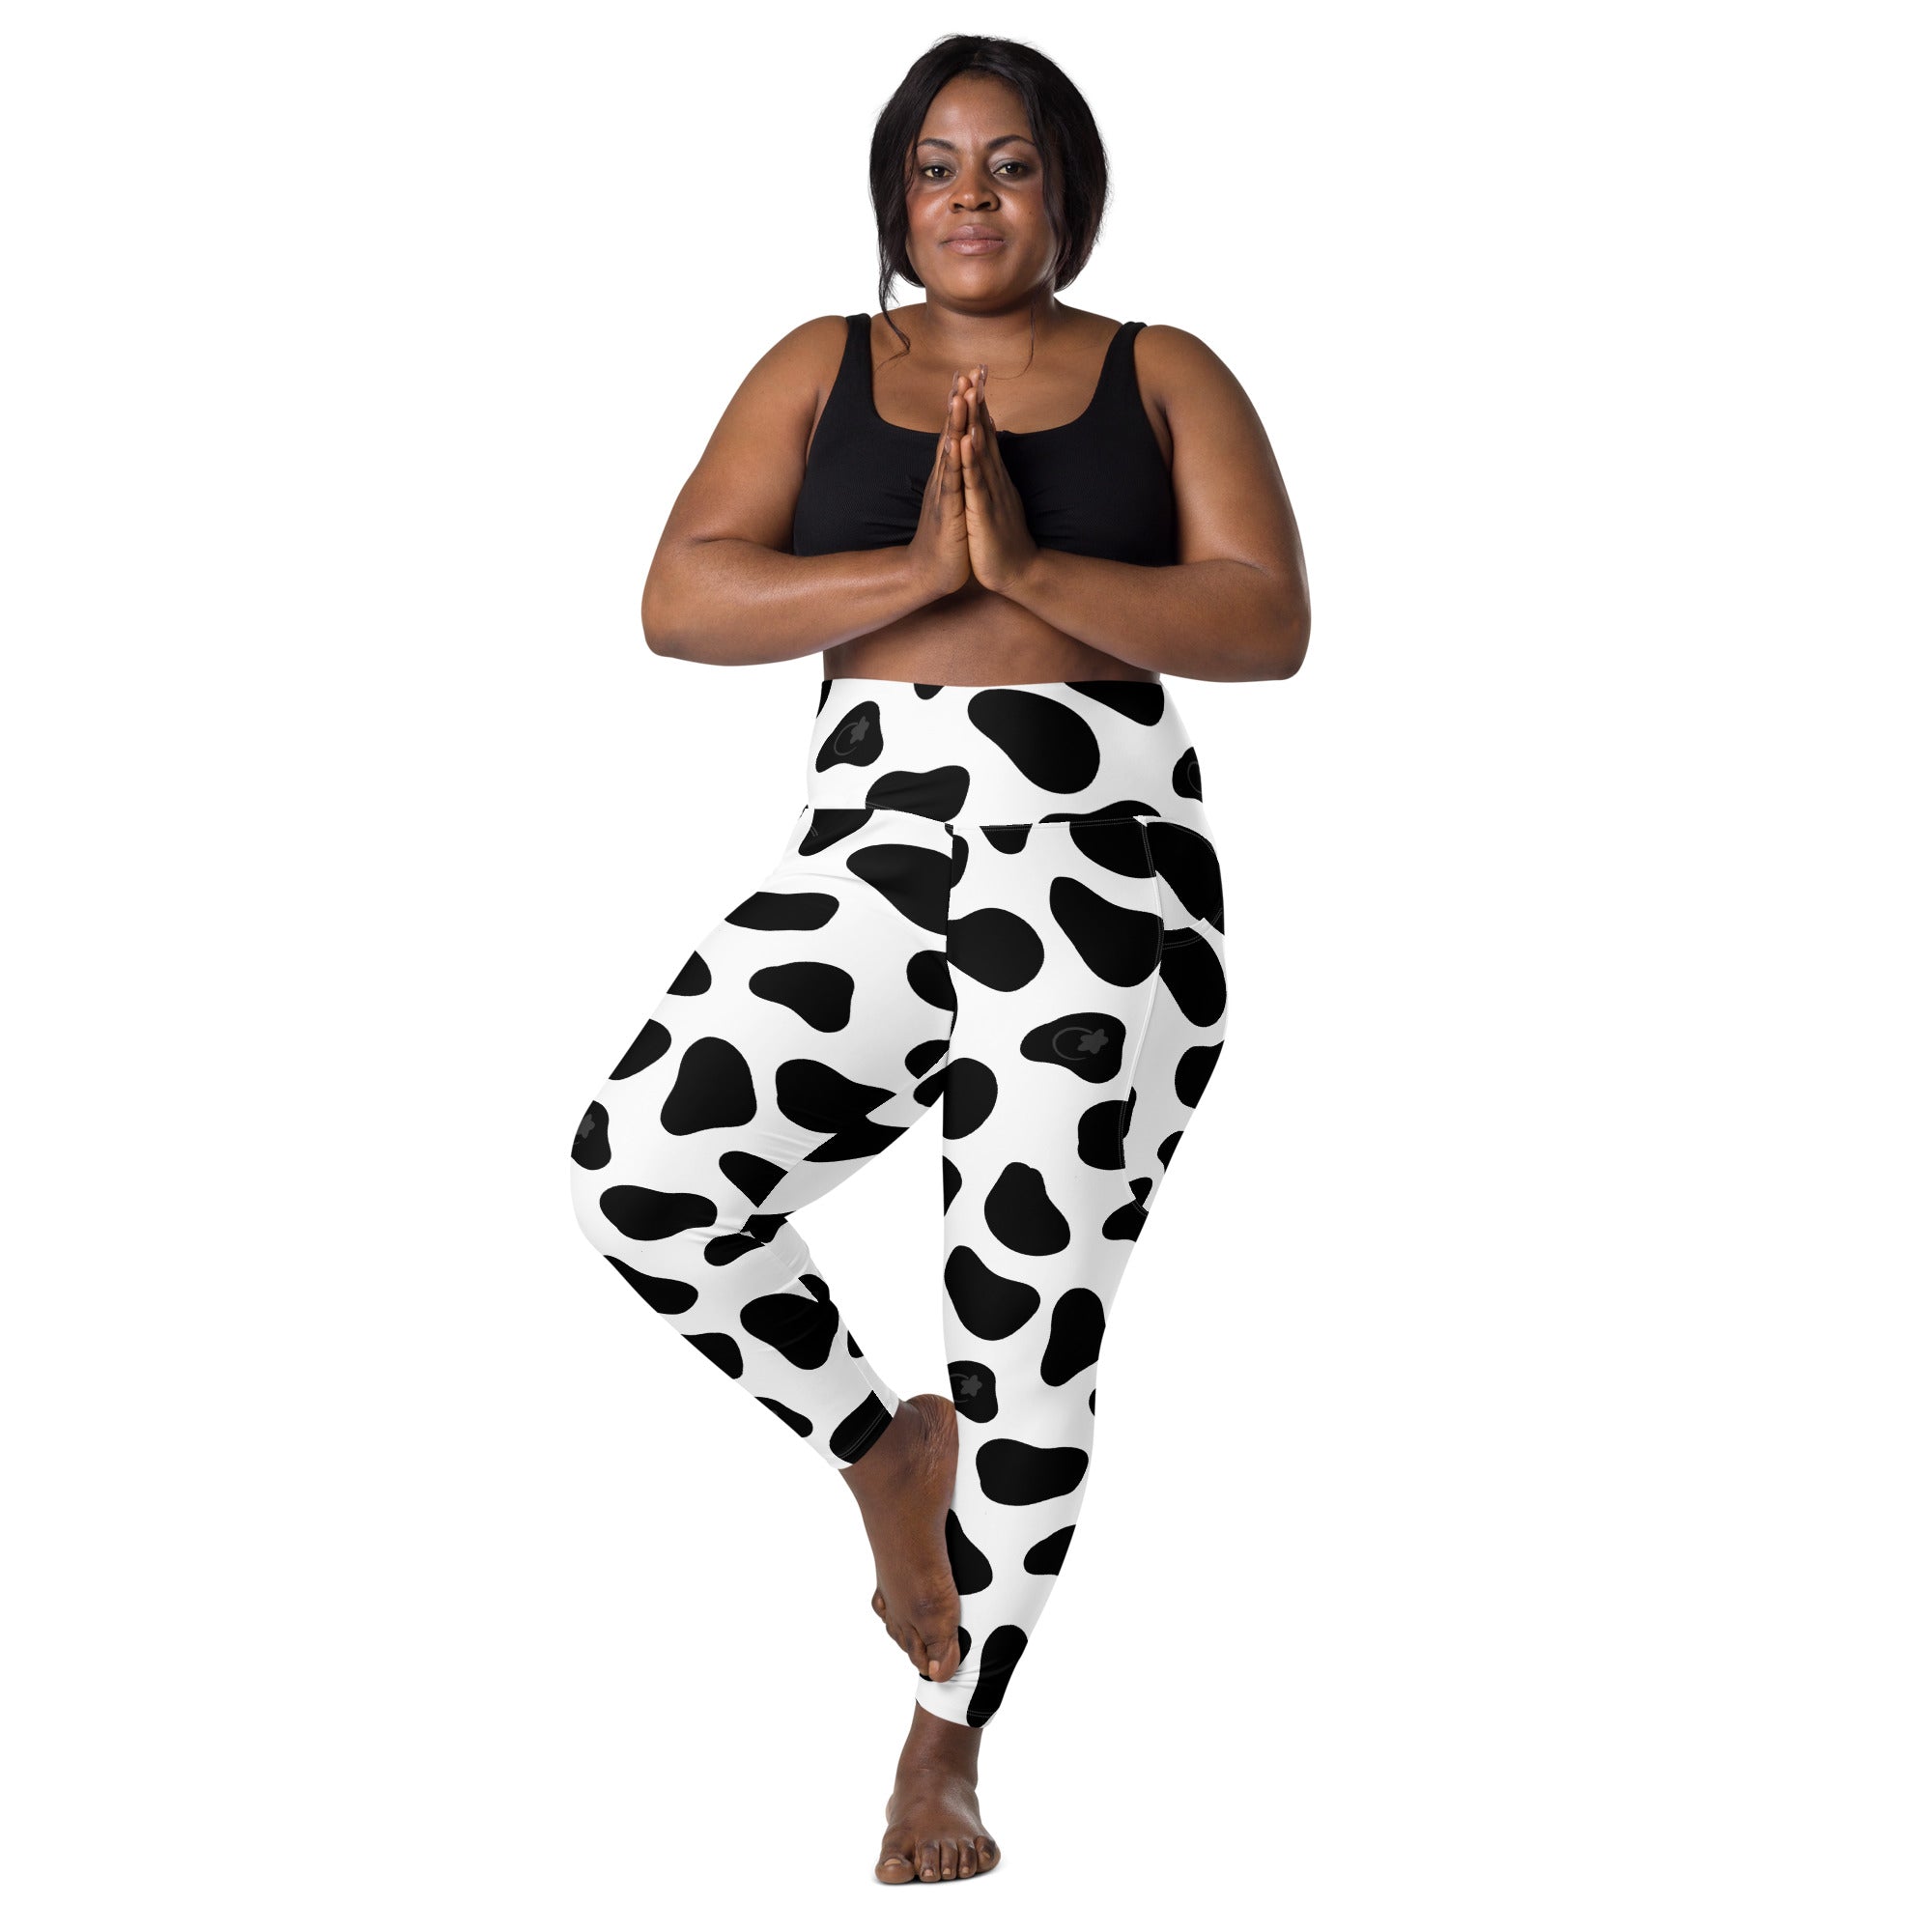 Cow Leggings with pockets